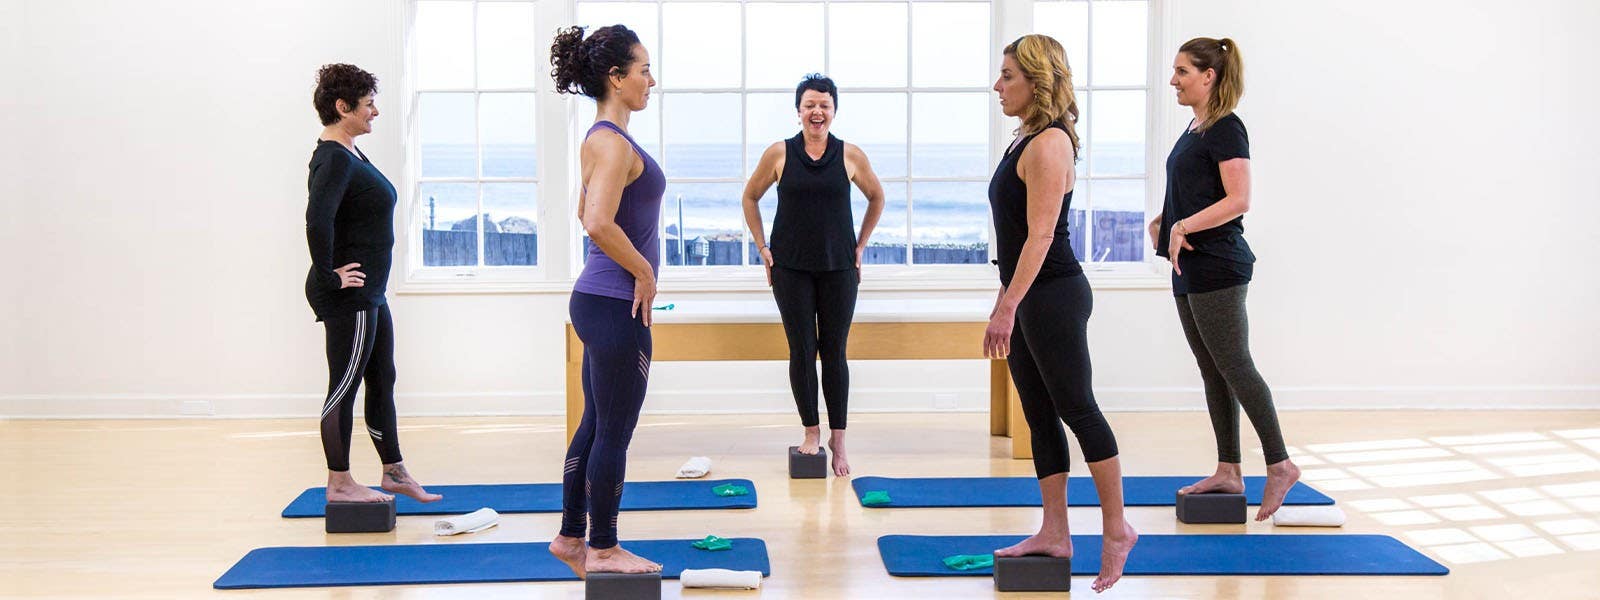 A Look at Team Memberships from Pilates Anytime